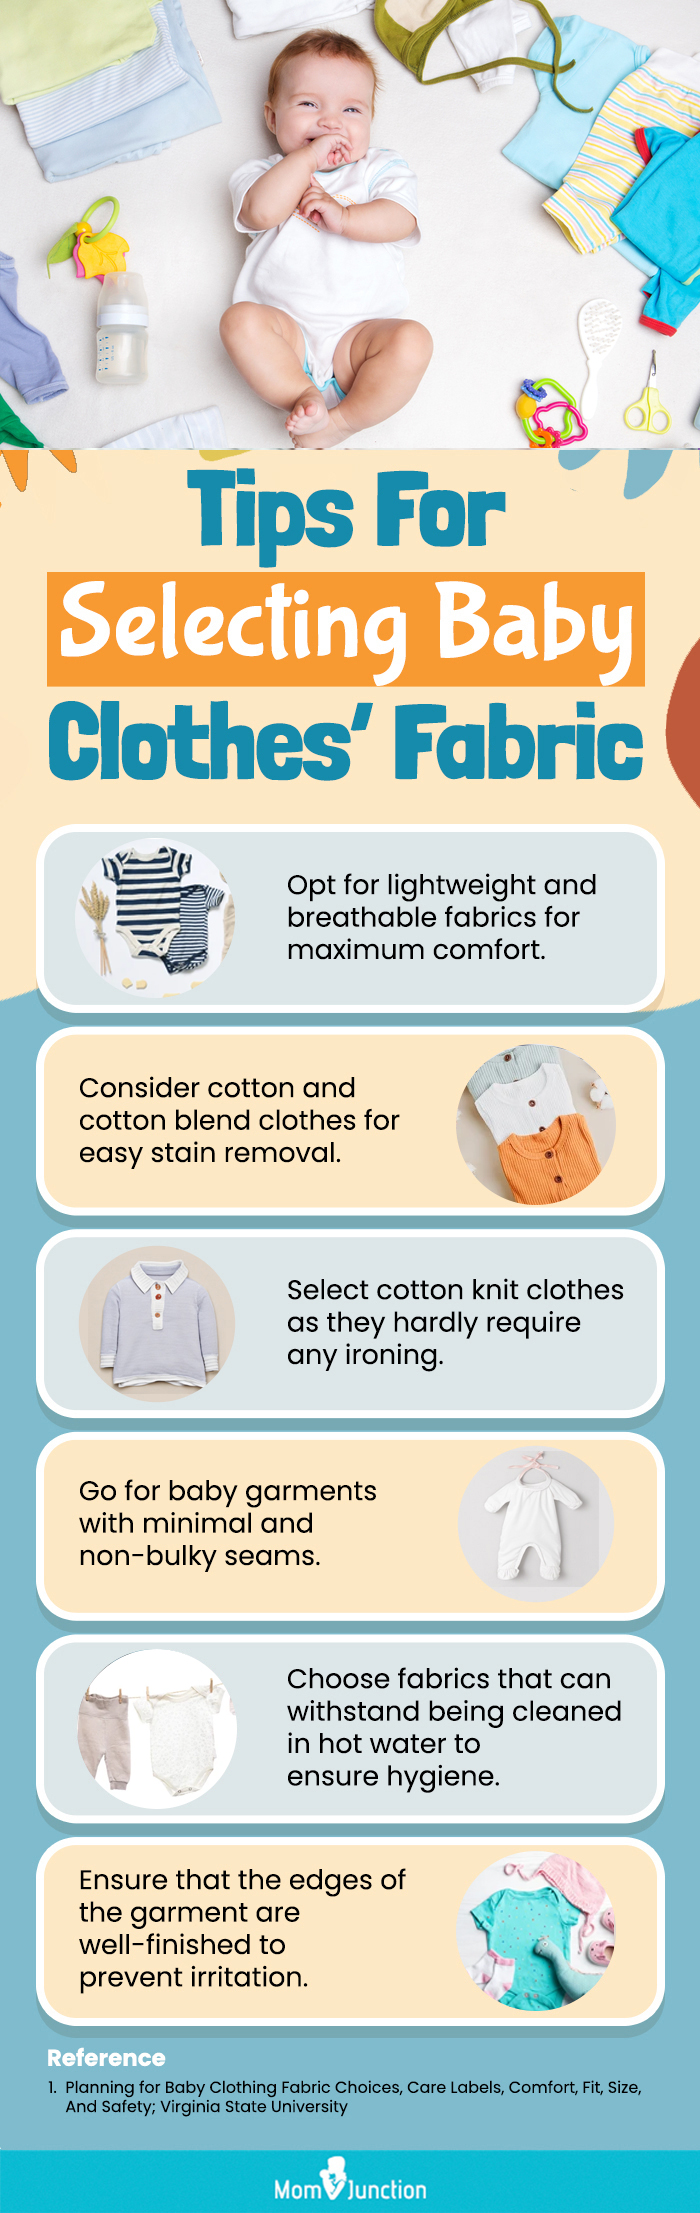 Tips For Selecting Baby Clothes’ Fabric (infographic)